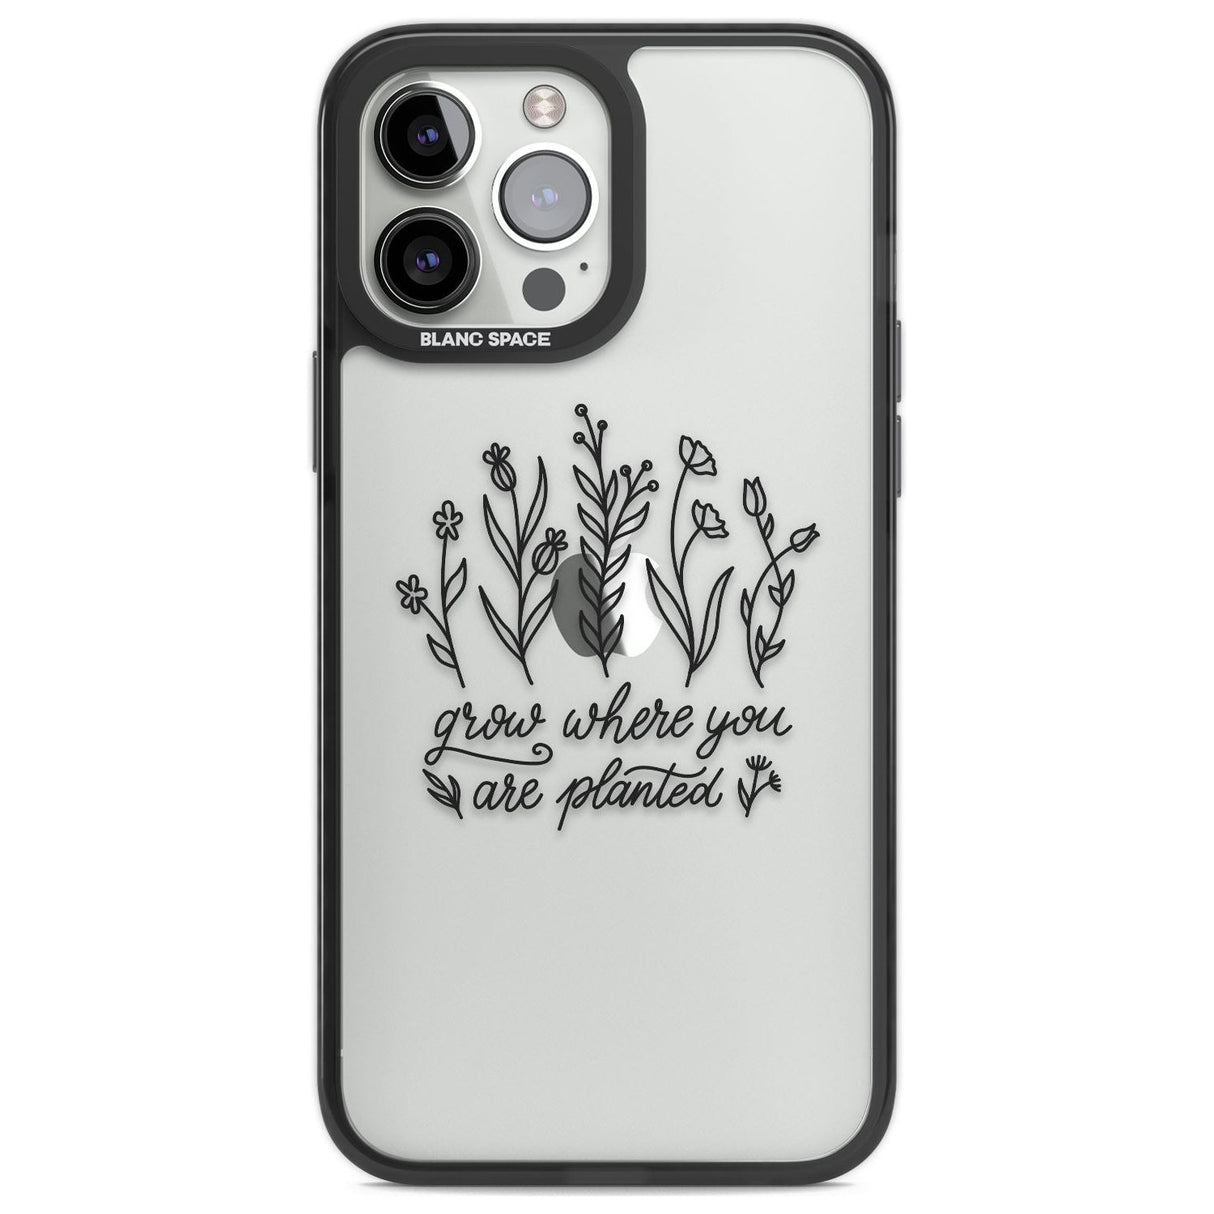 Grow where you are planted Phone Case iPhone 13 Pro Max / Black Impact Case,iPhone 14 Pro Max / Black Impact Case Blanc Space